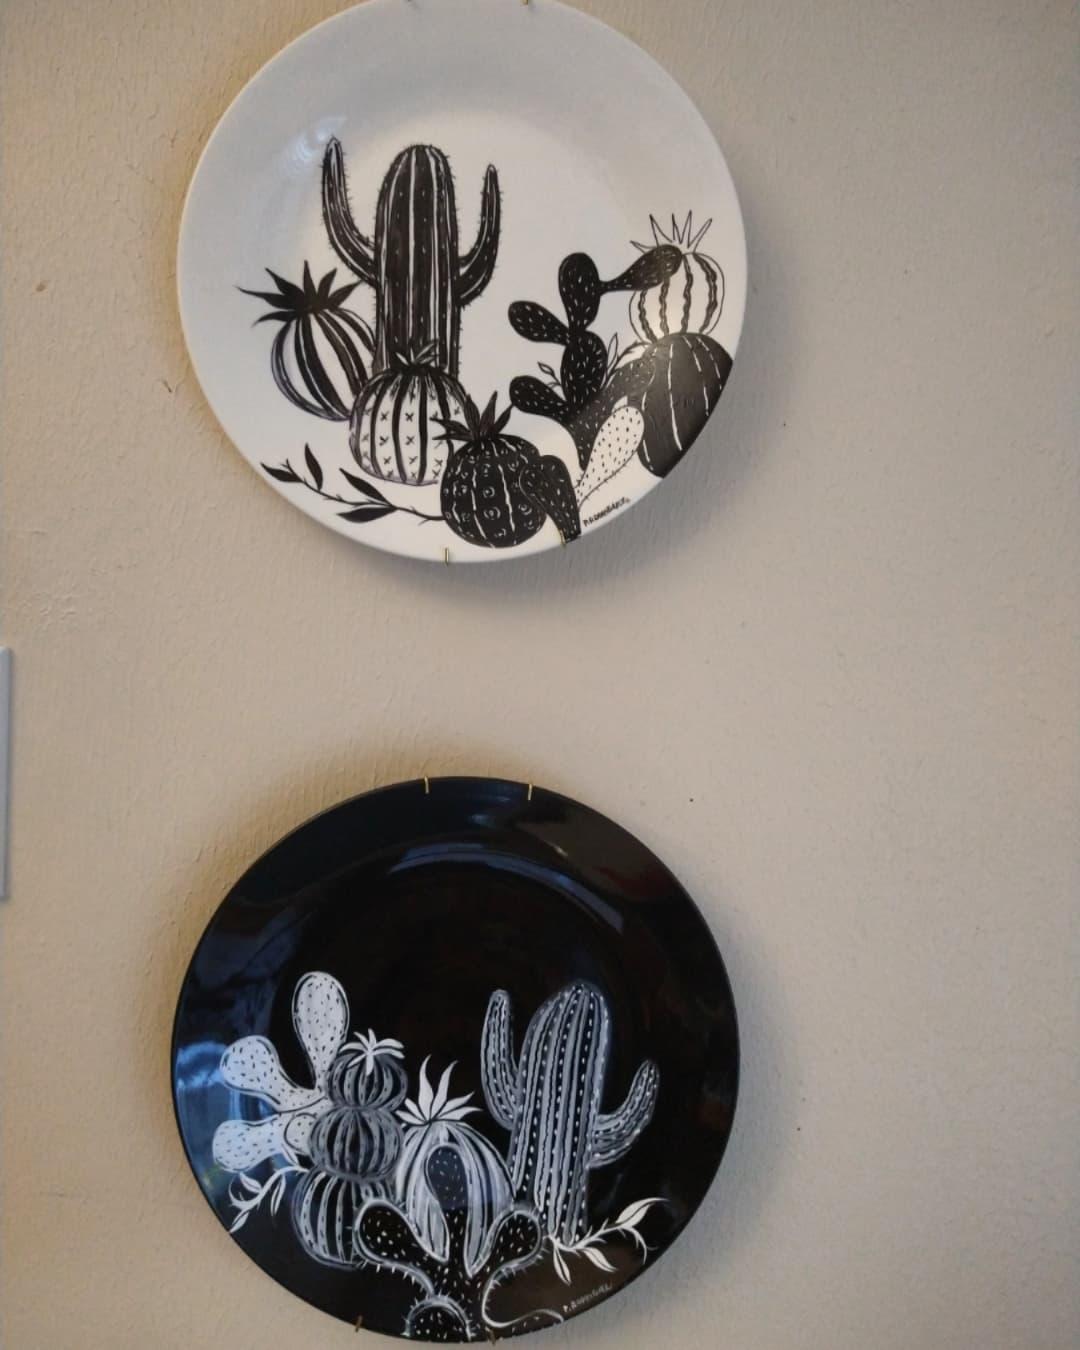 Pair of Prickly Plates